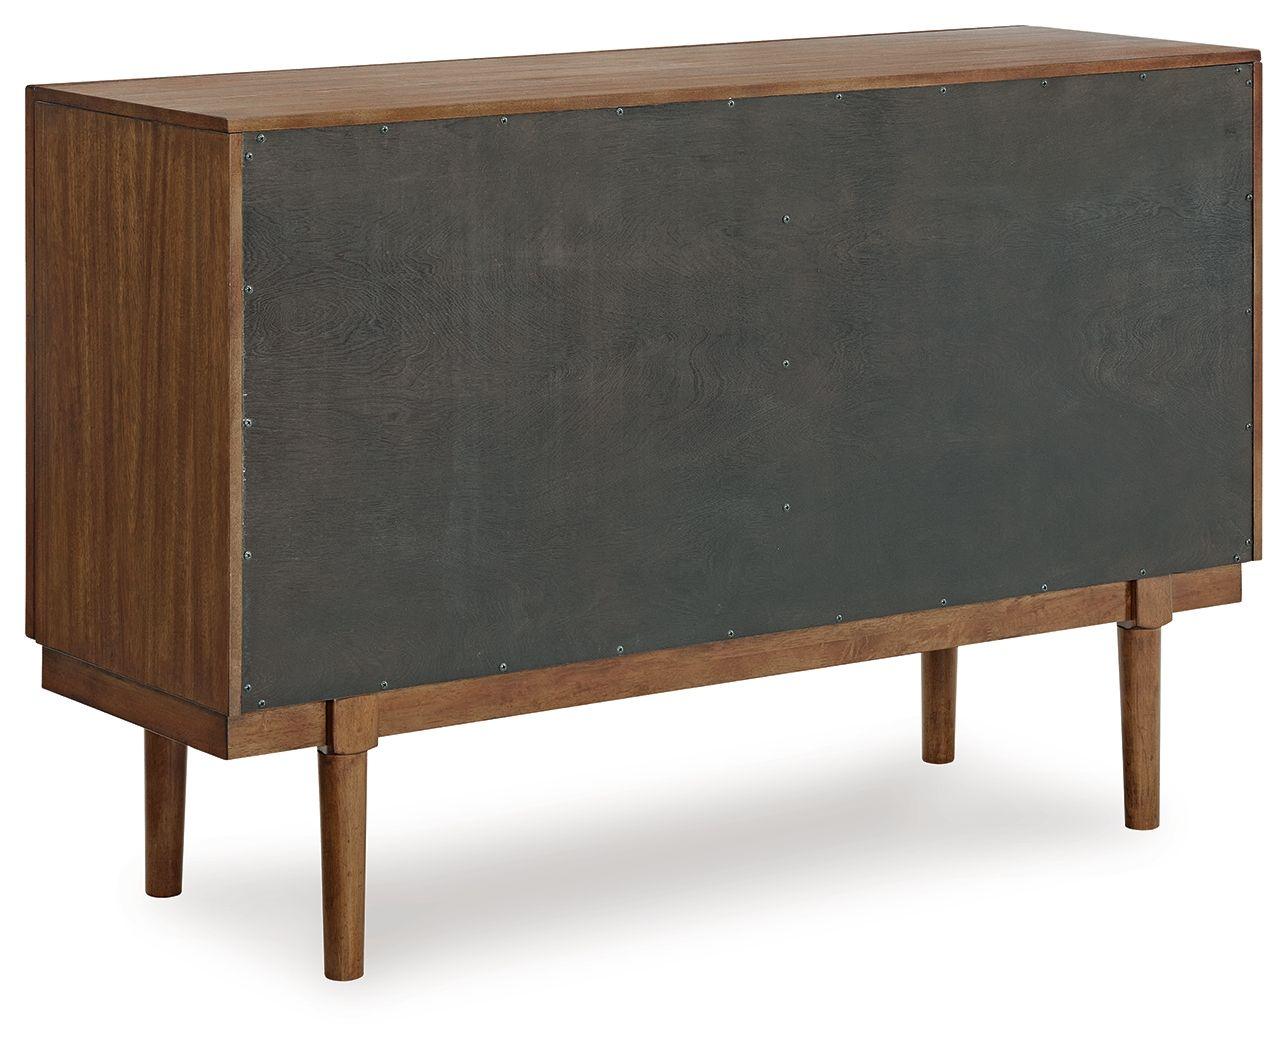 Signature Design by Ashley® - Lyncott - Brown - Dining Room Server - 5th Avenue Furniture